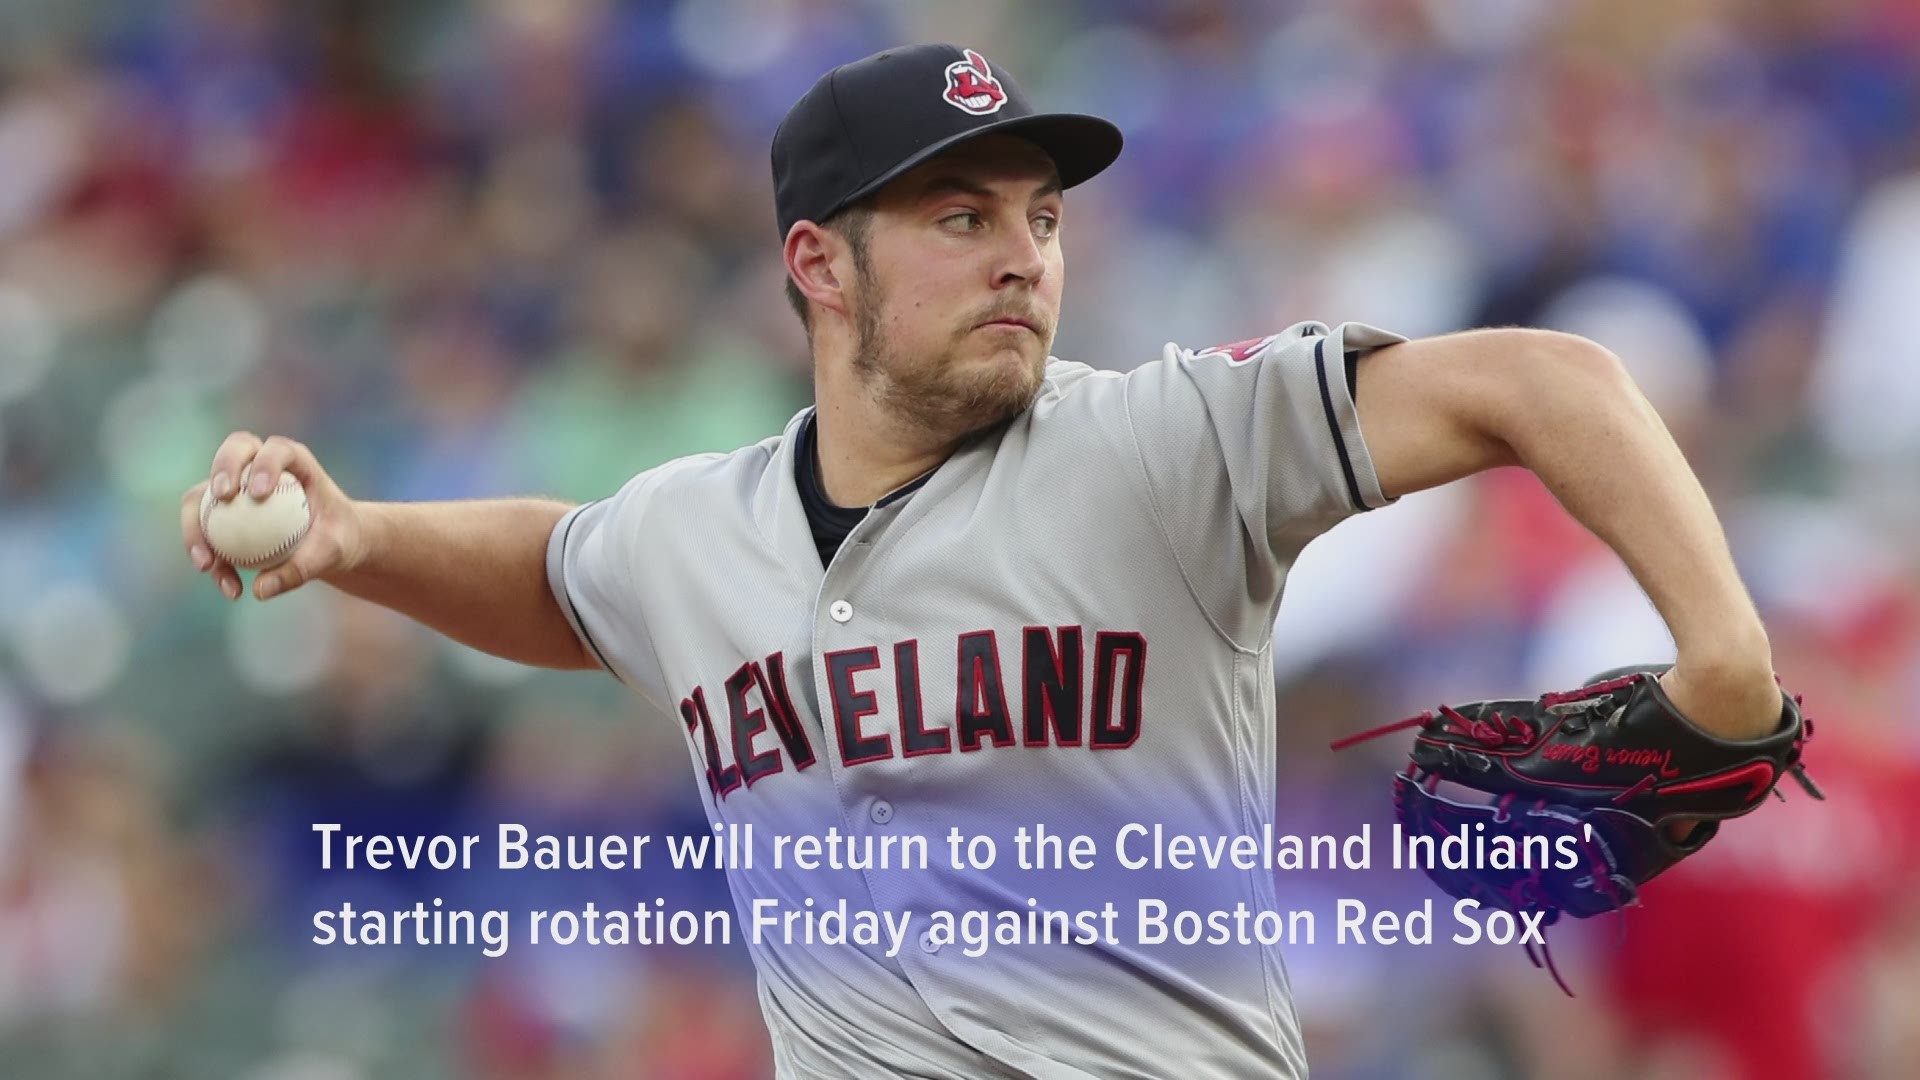 Trevor Bauer to return to Cleveland Indians against the Red Sox